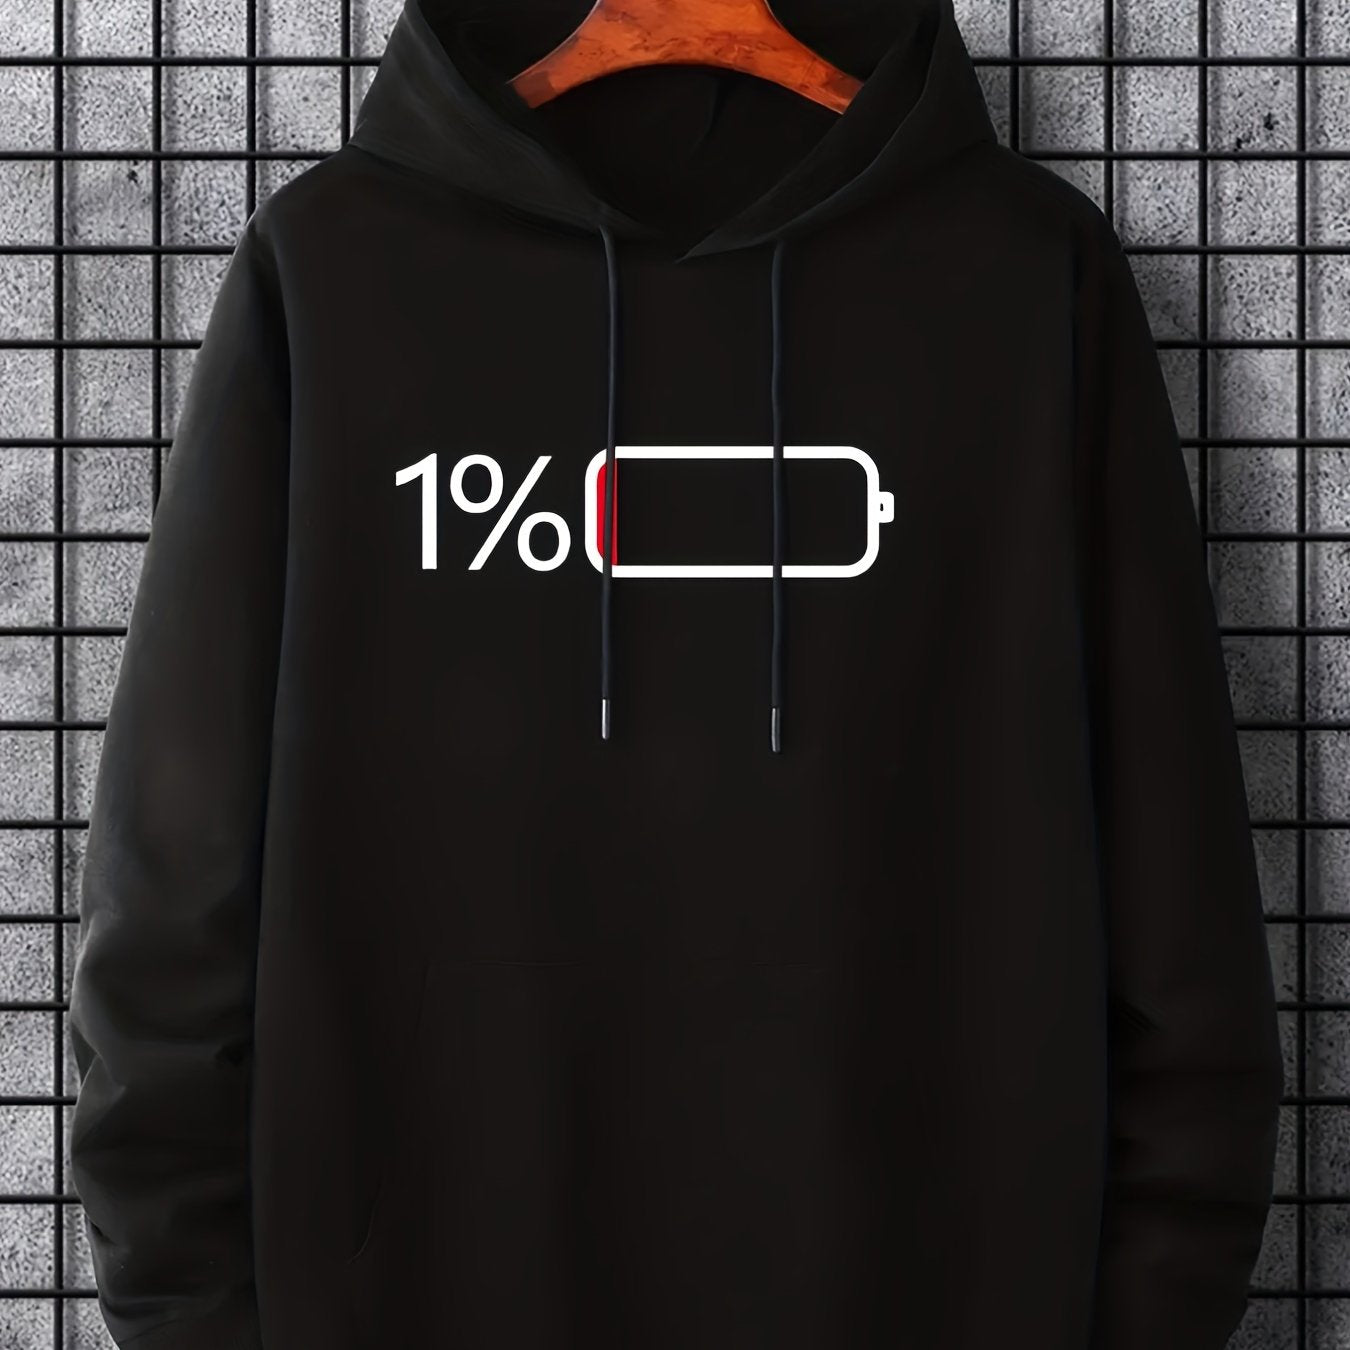 Hoodies For Men, Battery Low Graphic Hoodie, Men's Casual Pullover Hooded Sweatshirt With Kangaroo Pocket For Spring Fall, As Gifts